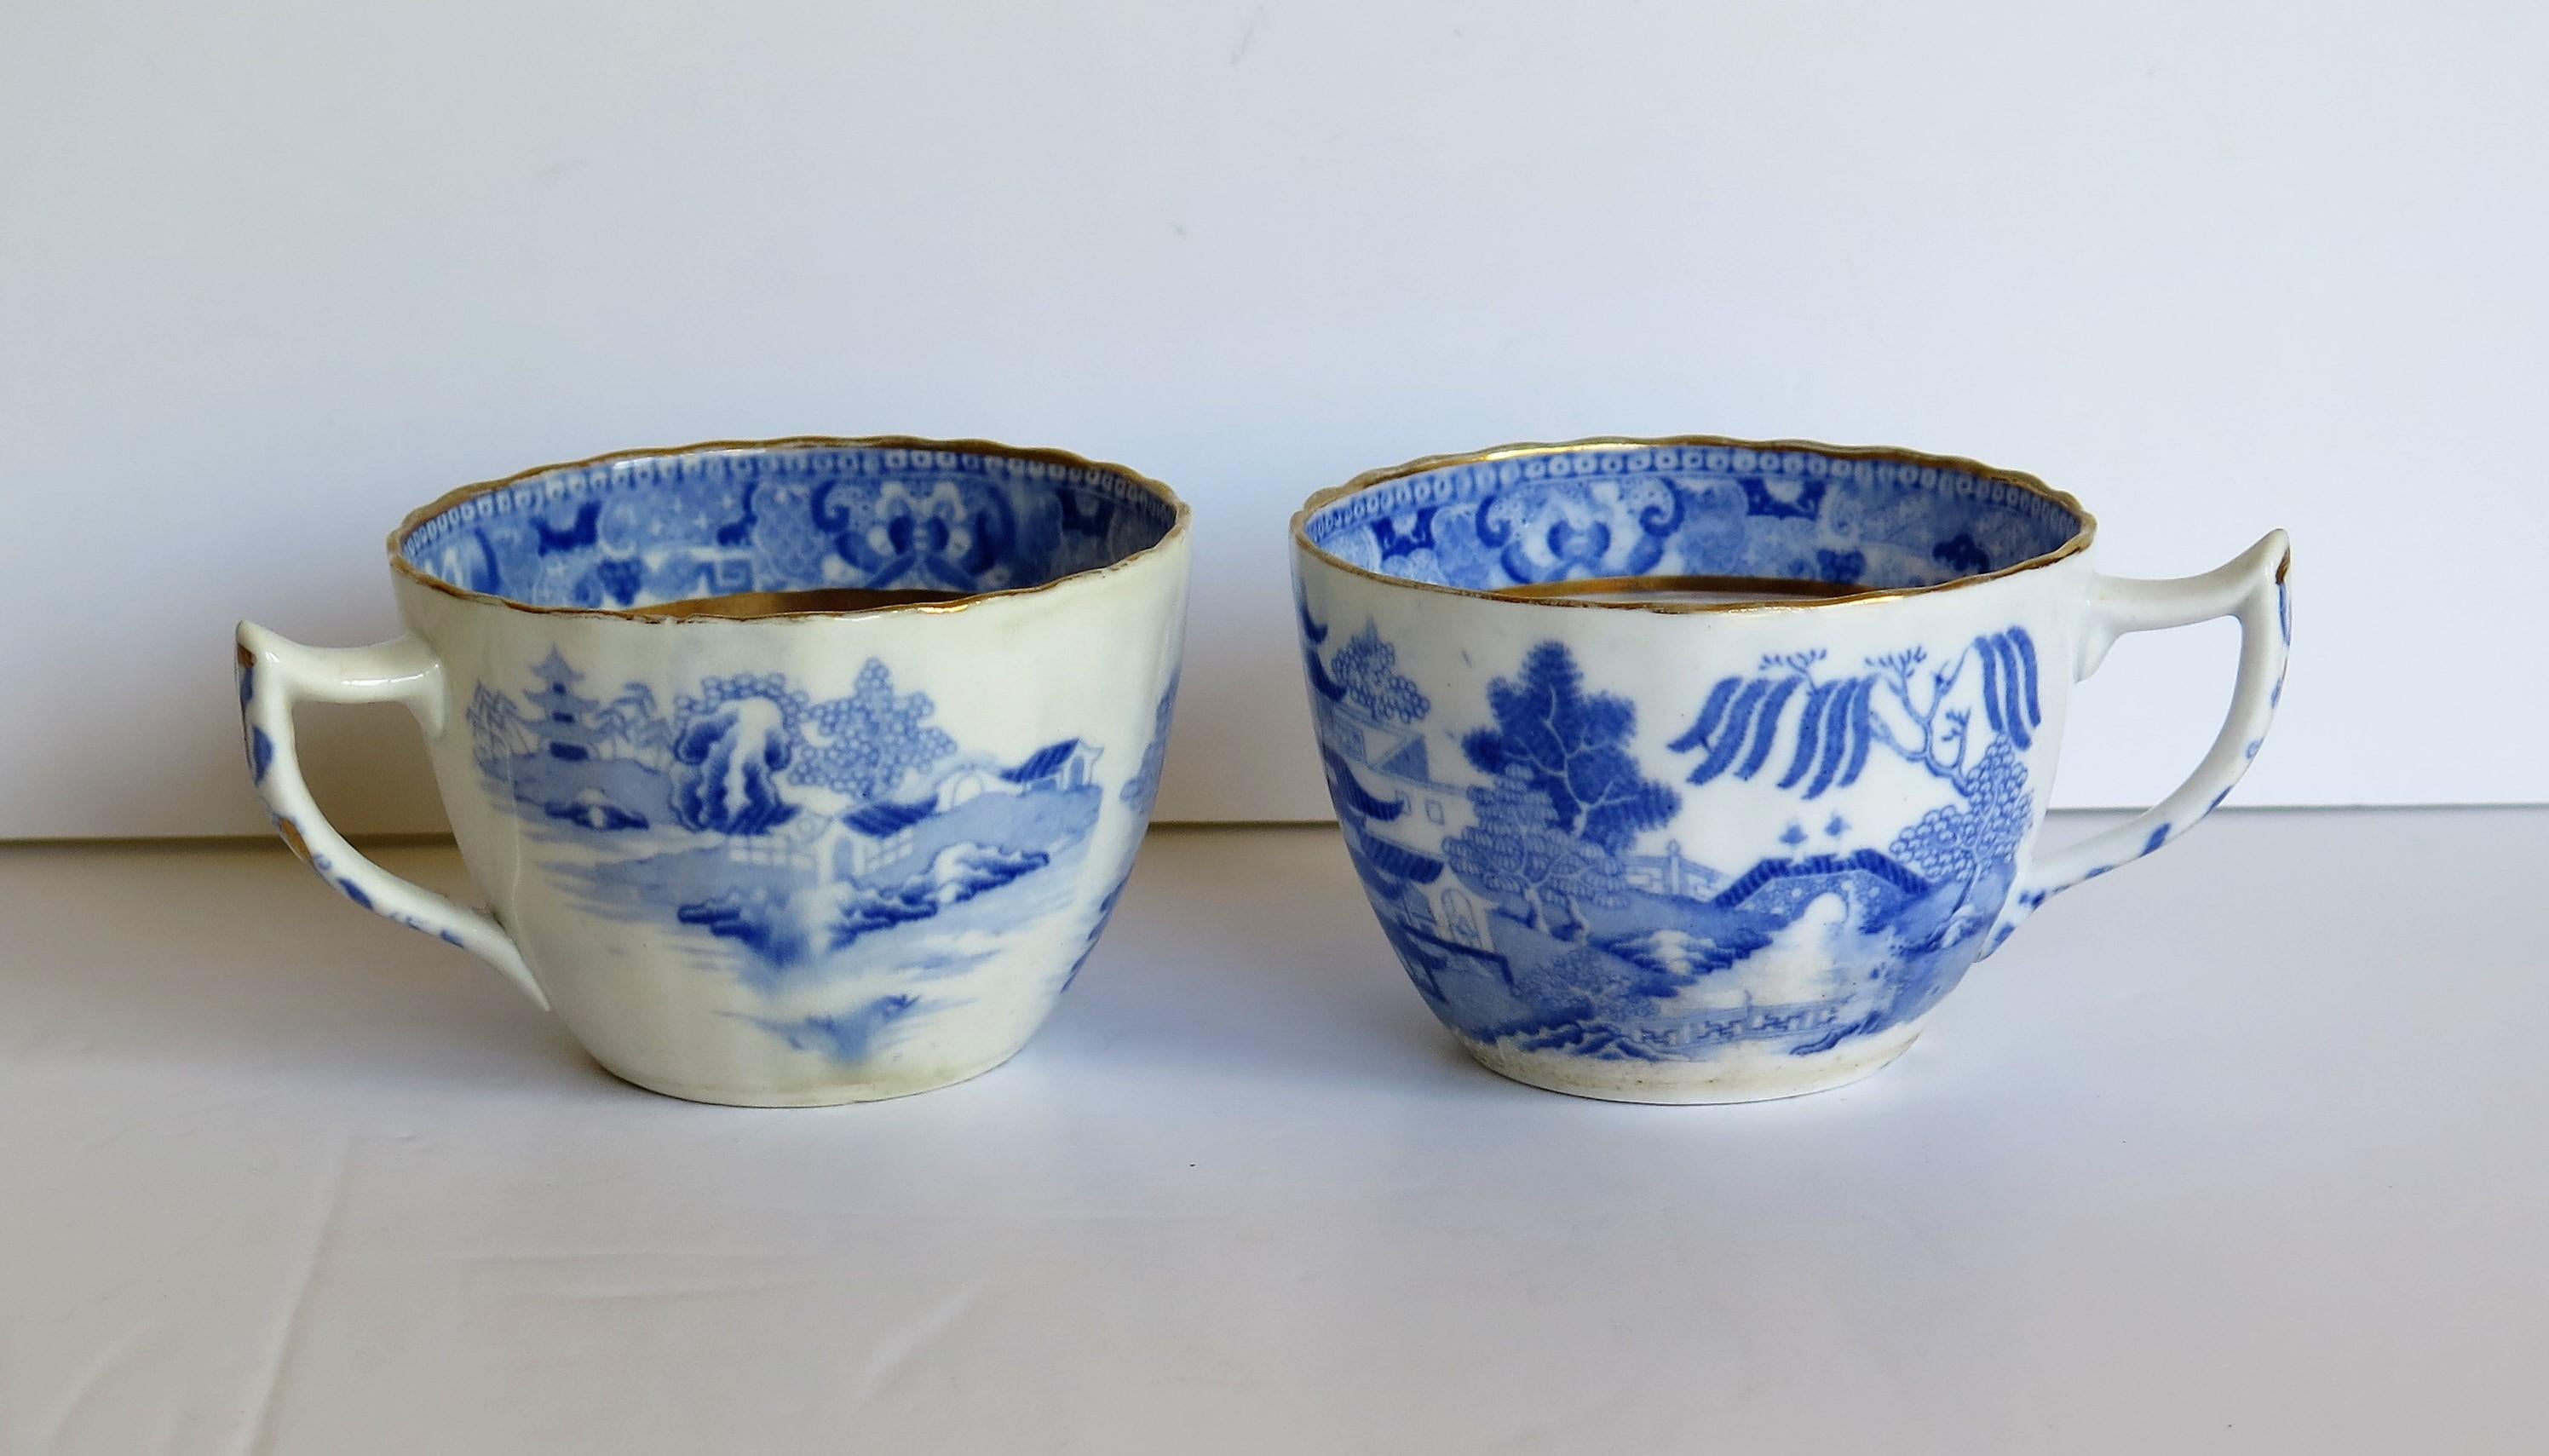 Chinoiserie Miles Mason Porcelain Pair of Tea Cups Broseley Blue and White Pattern, Ca 1805